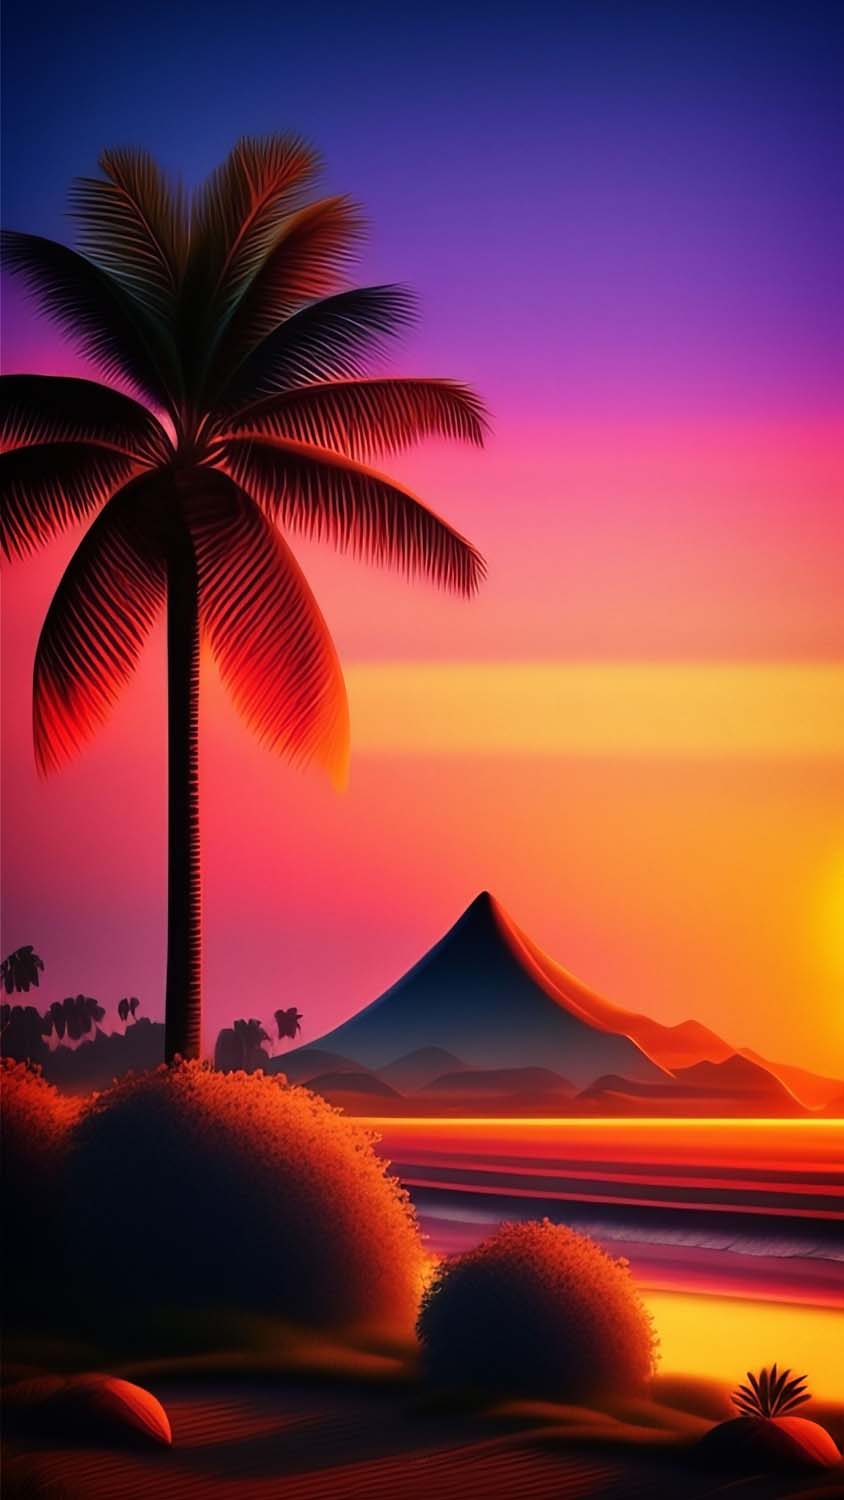 Palm Tree Sunset Wallpaper 70 images